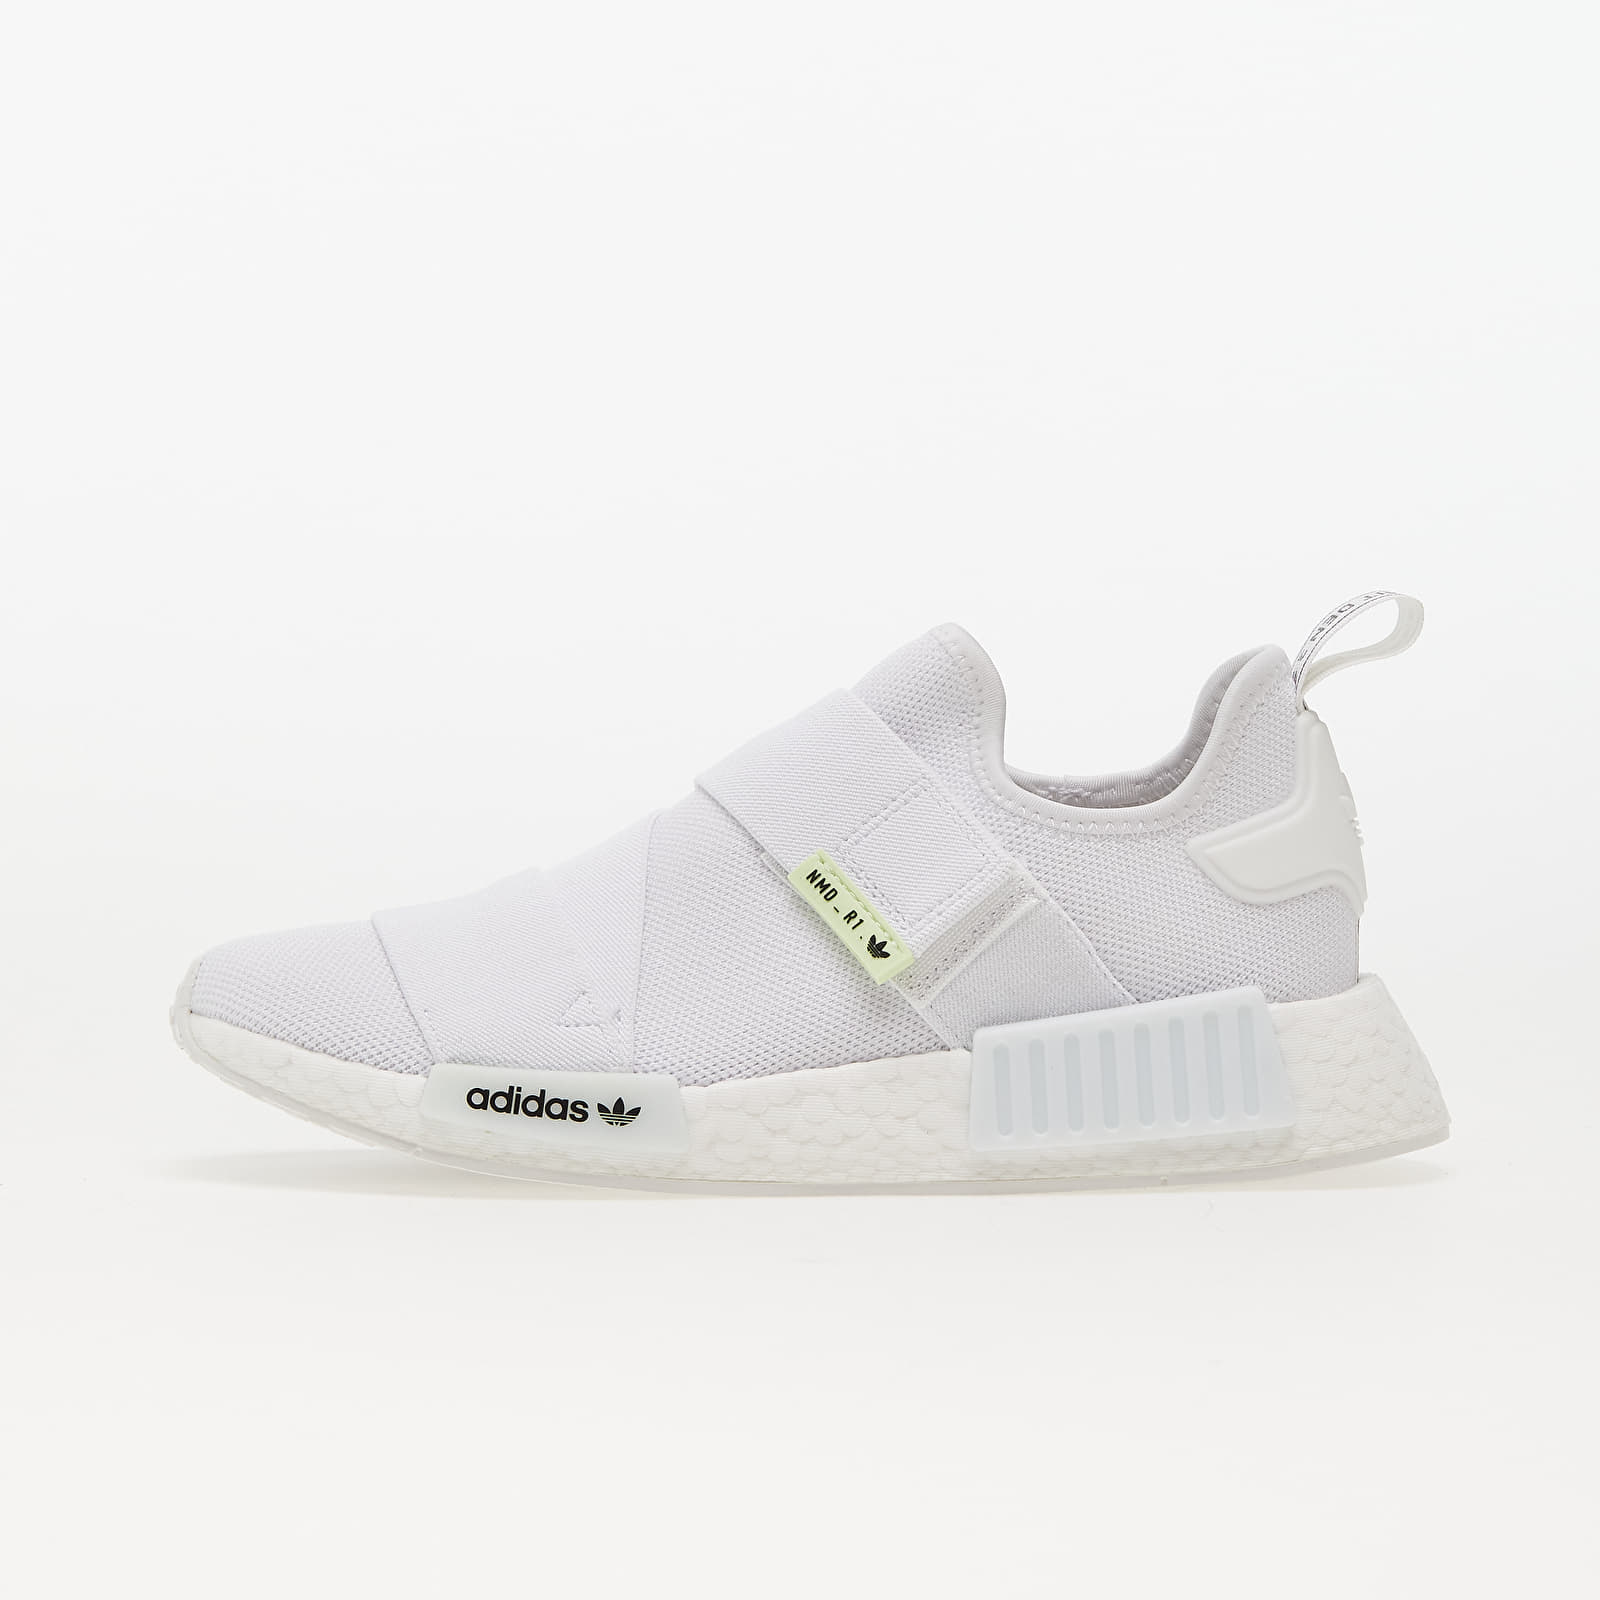 Chaussures et baskets femme adidas NMD_R1 W Ftw White/ Ftw White/ Core Black